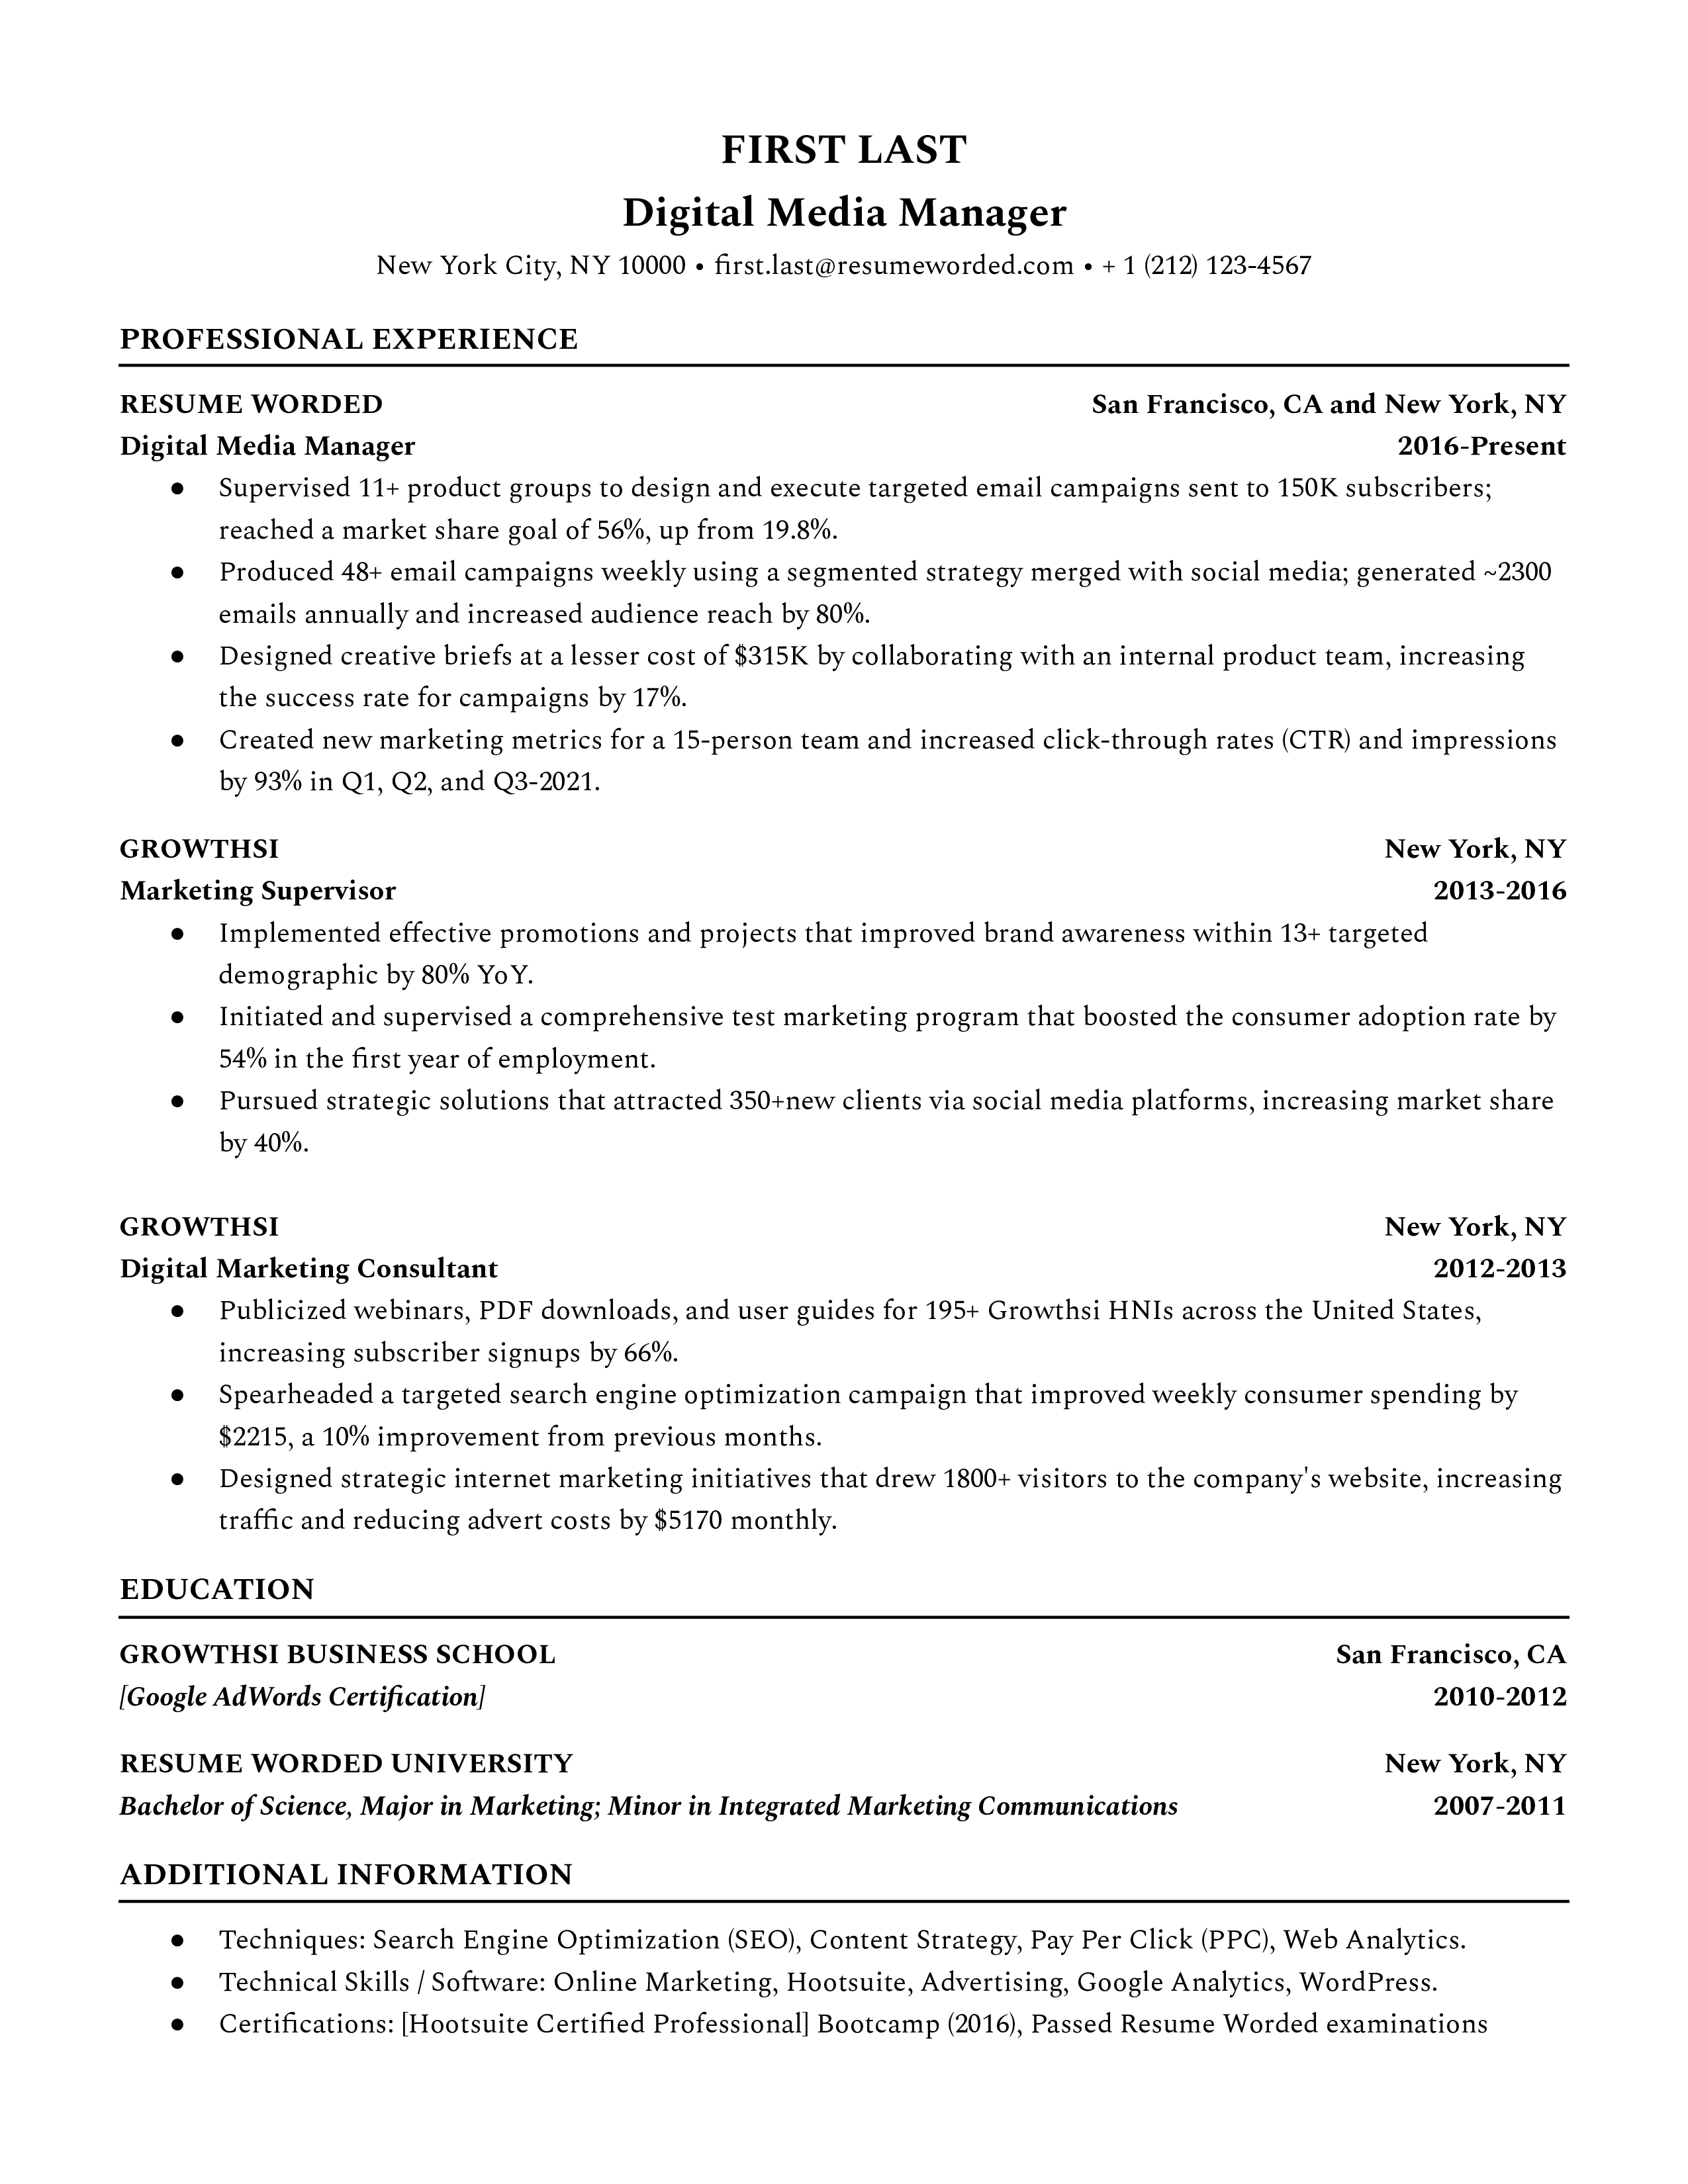 Resume of a digital media manager role, with senior management experience and leading a media team